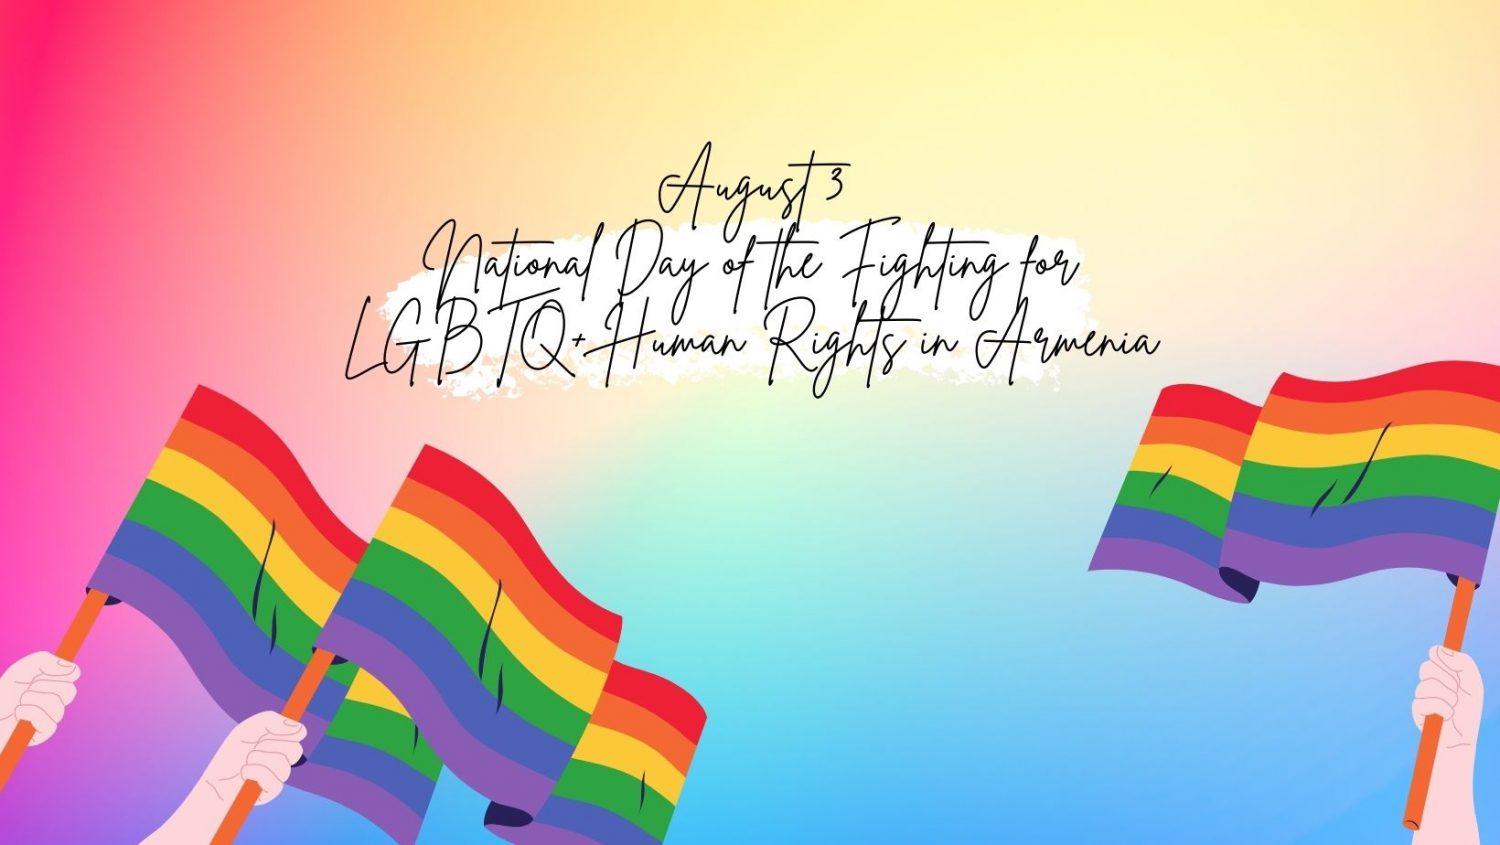 National Day of the Fighting for LGBTQ+ Human Rights in Armenia